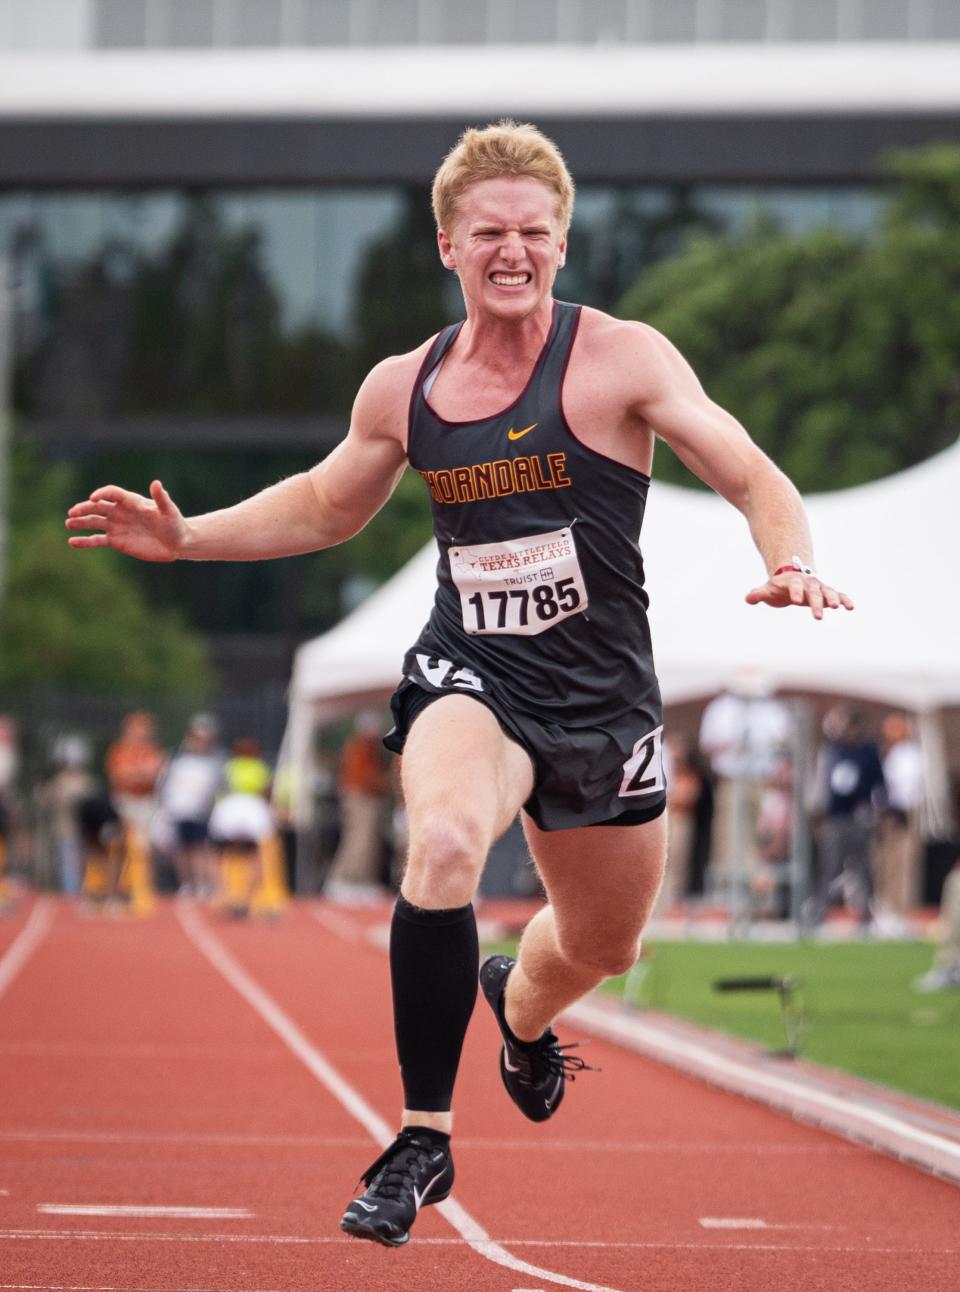 Thorndale's Carson McCoy won a pair medals at the UIL state meet on Friday, taking gold in the 200 meters after earning silver in the 100 meters.